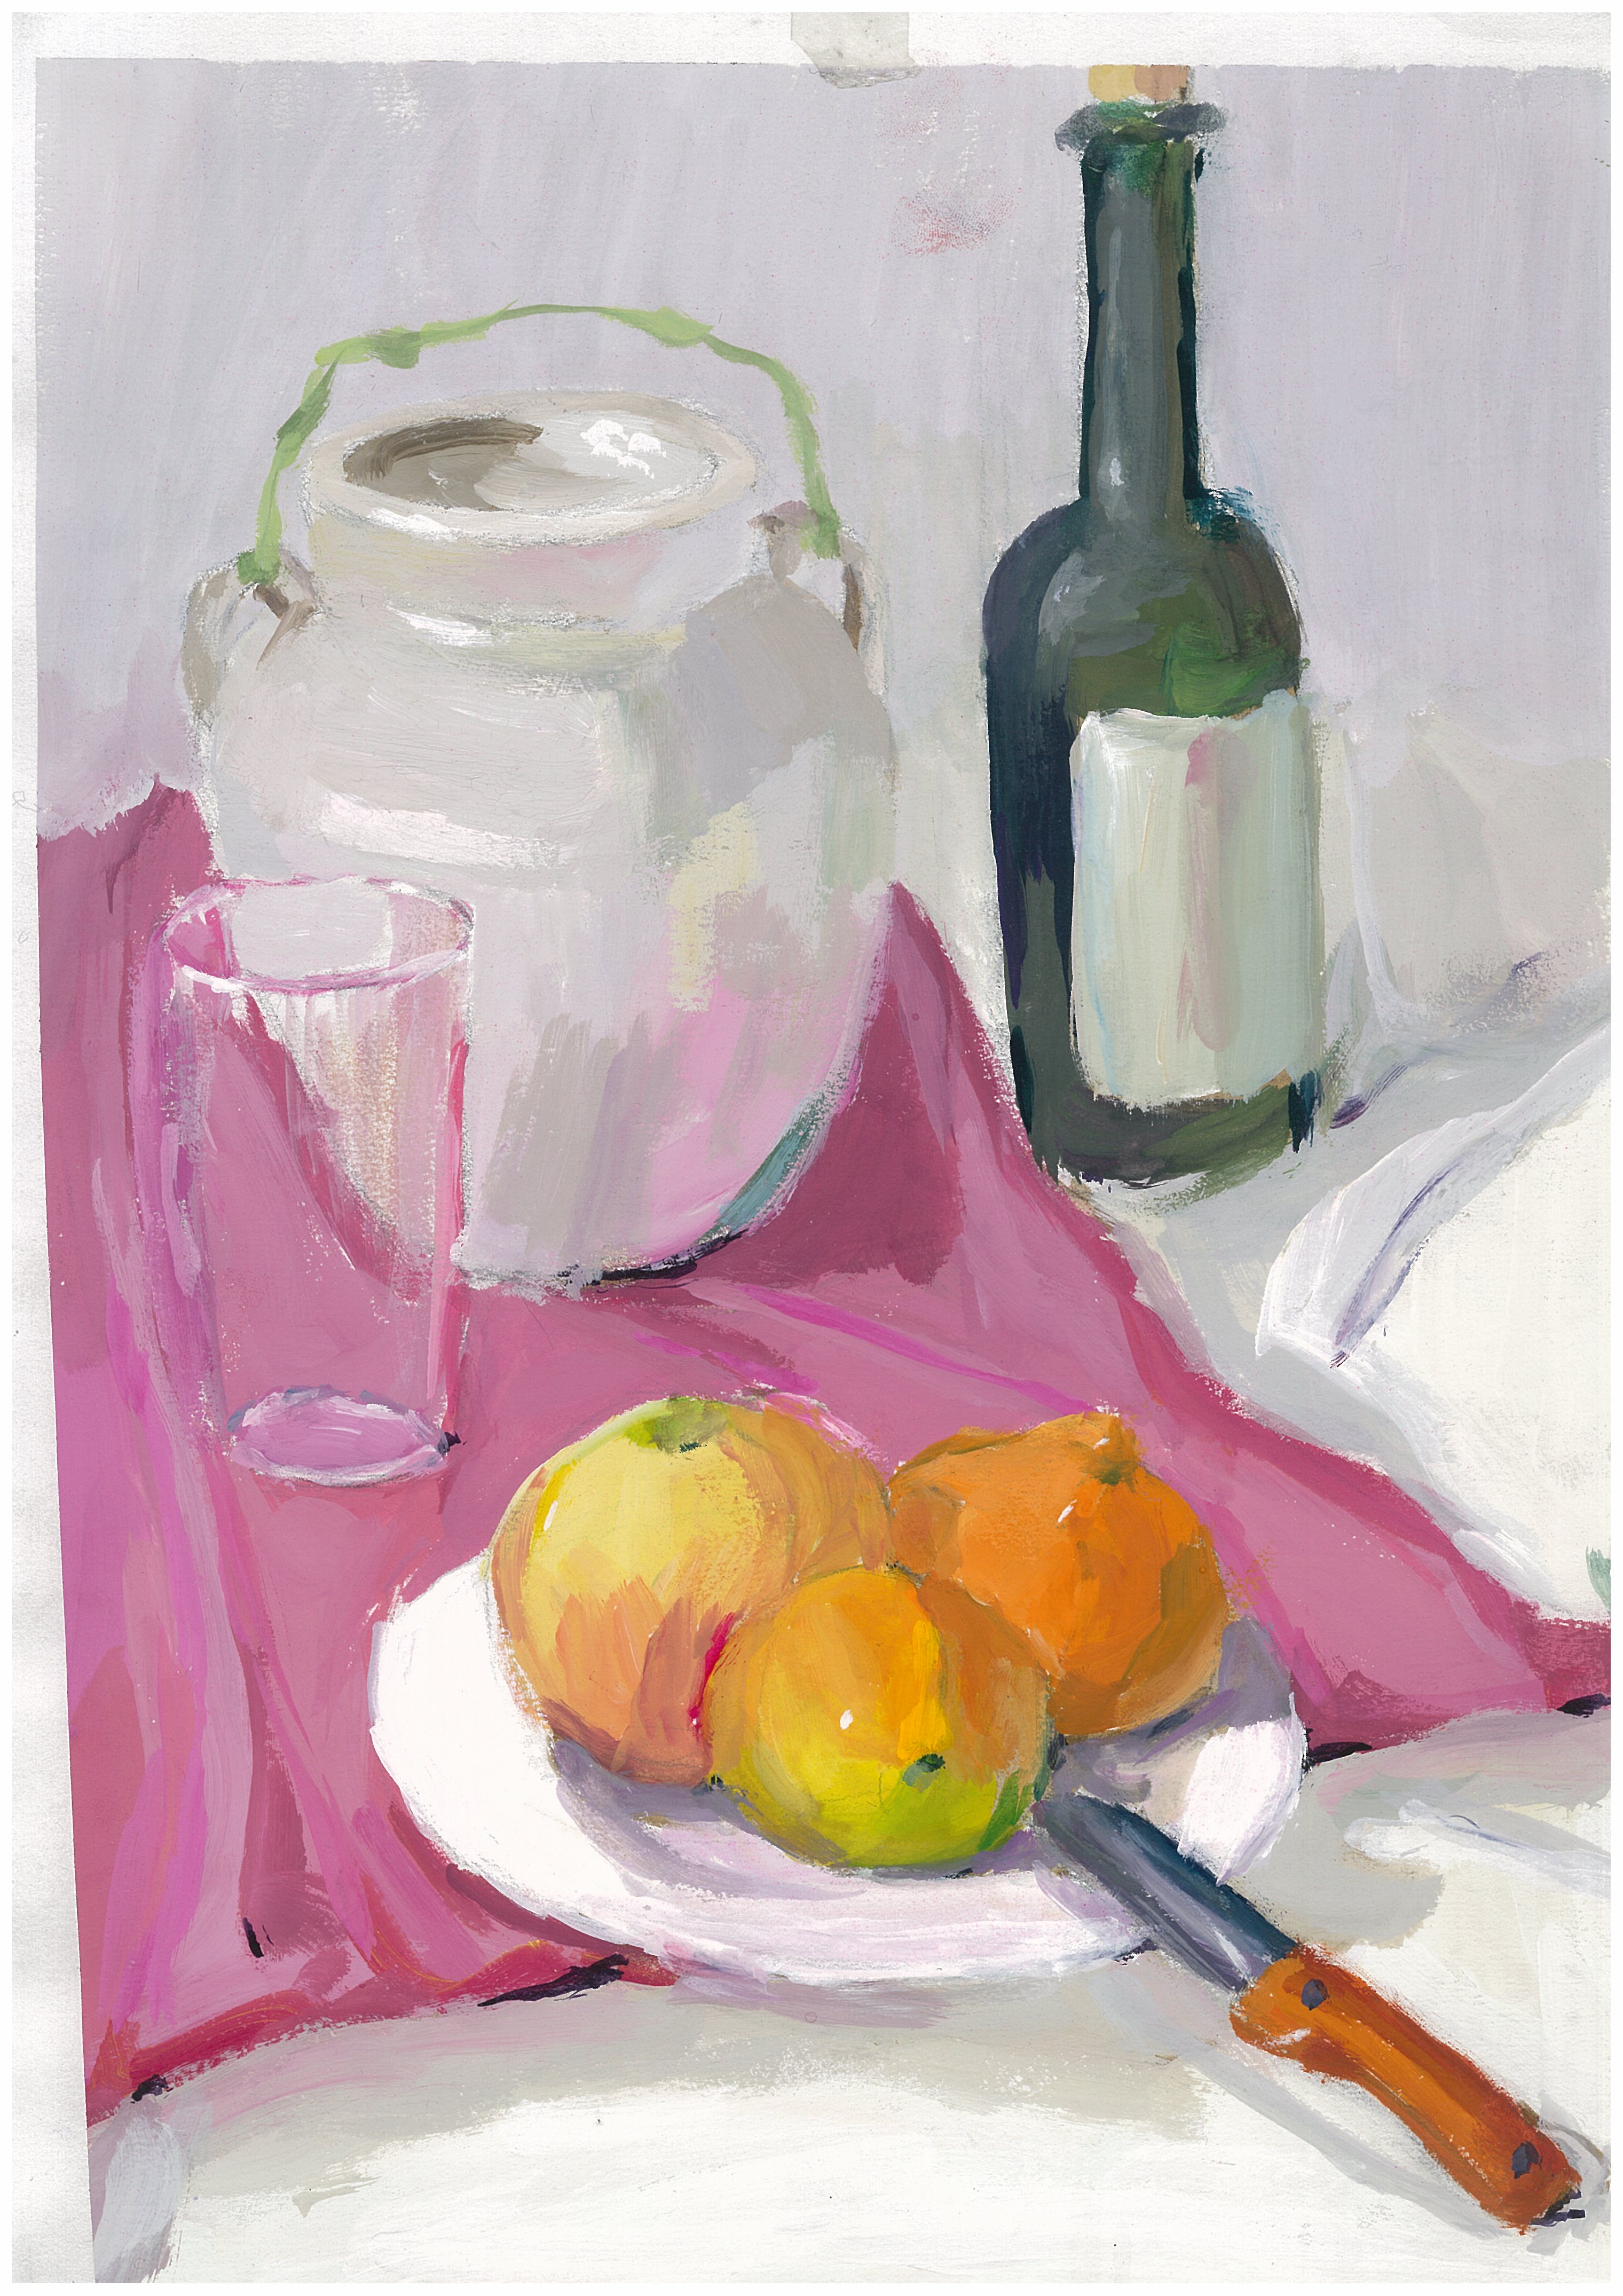 This is a water color painting about some stills like fruits and bottles.